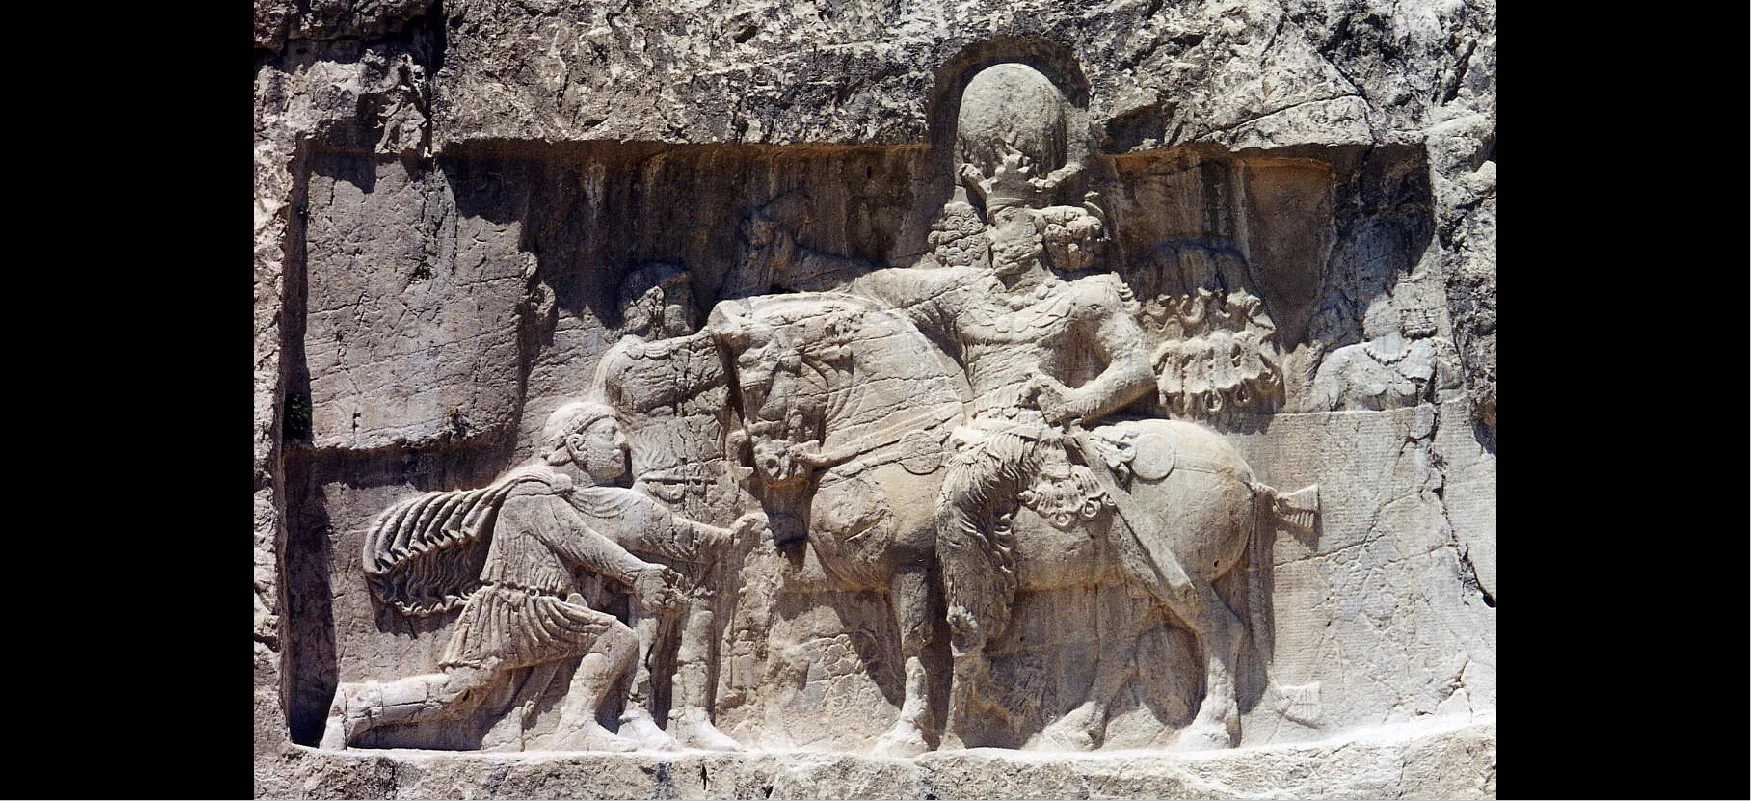 A picture of a wall with a rectangular, beige colored stone carving scene is shown. In the middle, a man is sitting on a horse which is wearing a head dressing with flowers and straps, a decorated saddle, and a bow in its tail. The man is carved with ornate designs all over his torso and legs, has a crown on his head, a beard, flowing curly hair, and a sword on his left side with his left hand on it. His right arm extends over the head of the horse and he holds an object in his hand. Both the man and the horse are looking down at a man kneeling on the ground in front of the horse. He is wearing a flowing cape and a dress of armor. He has a beard and is holding his arms out in front of him. In between the man and the horse stands a man in armor with a beard, his head in the shadows of the carving. The top of a person is carved into the wall behind the horse. Around the rectangular carving is a bumpy stone wall.